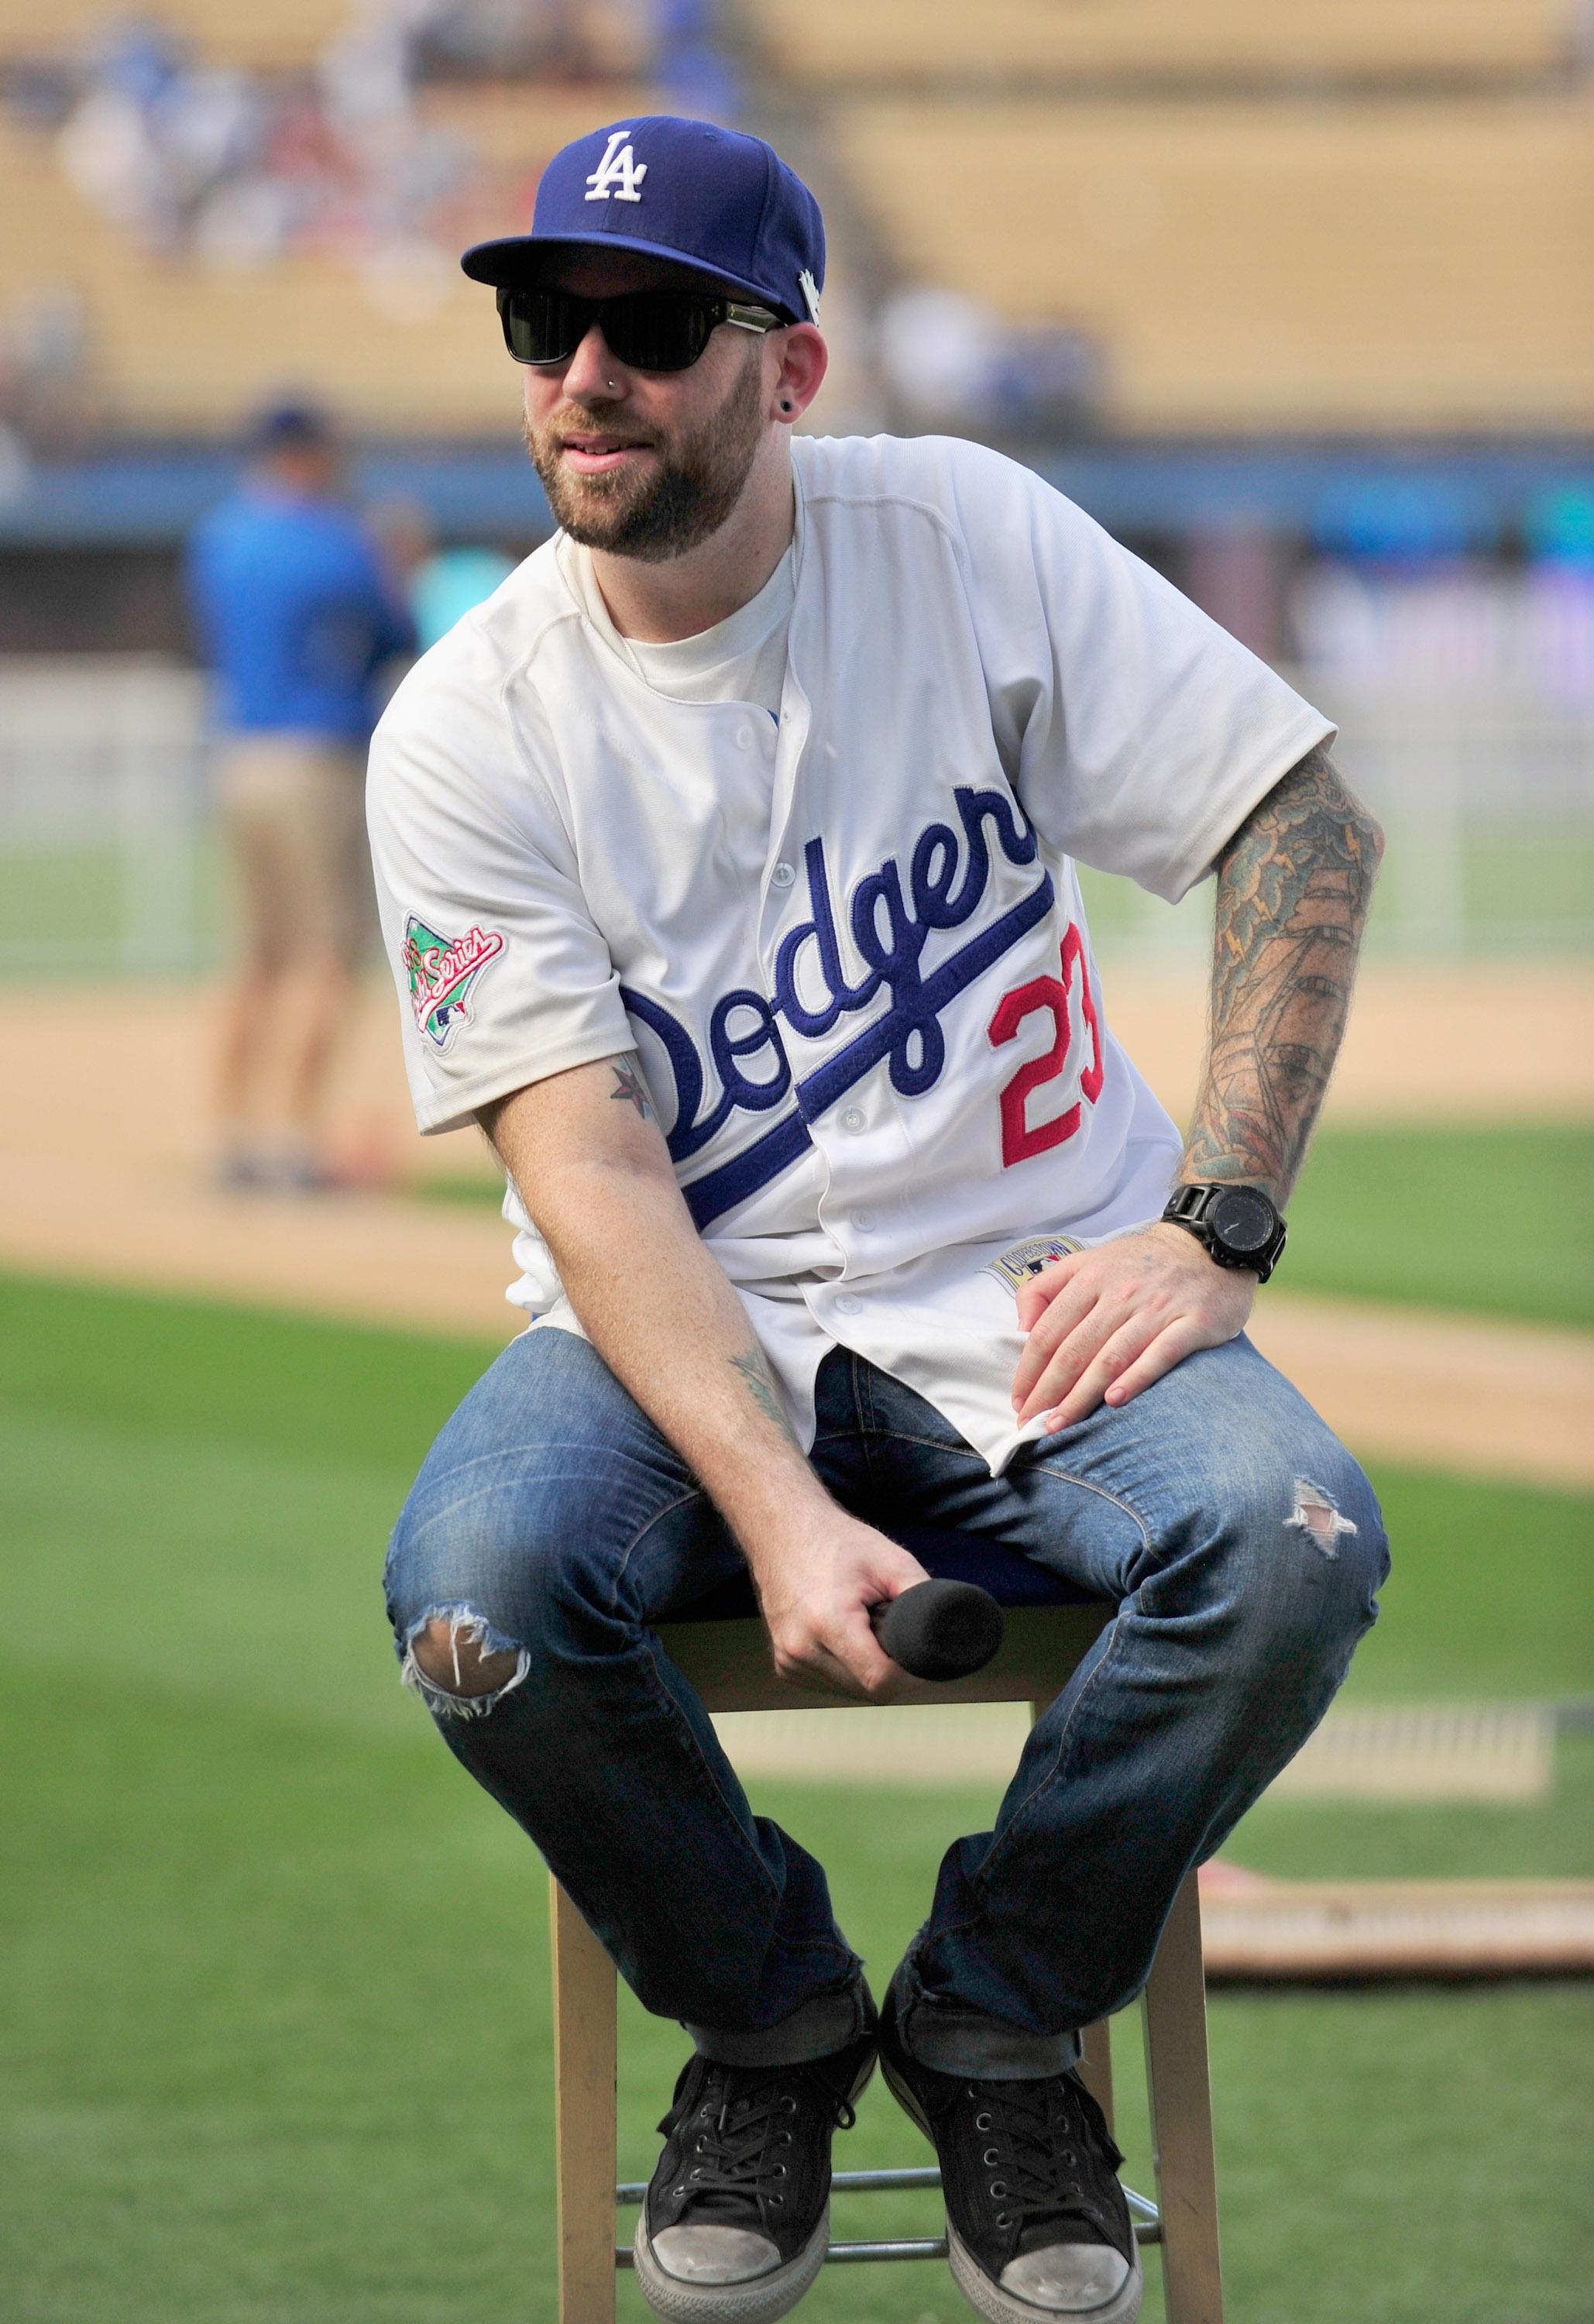 Grant Gelt on the field before the screening of "Sandlot" and following the MLB game between the San Diego Padres and Los Angeles Dodgers at Dodger Stadium on September 1, 2013, in Los Angeles, California | Source: Getty Images